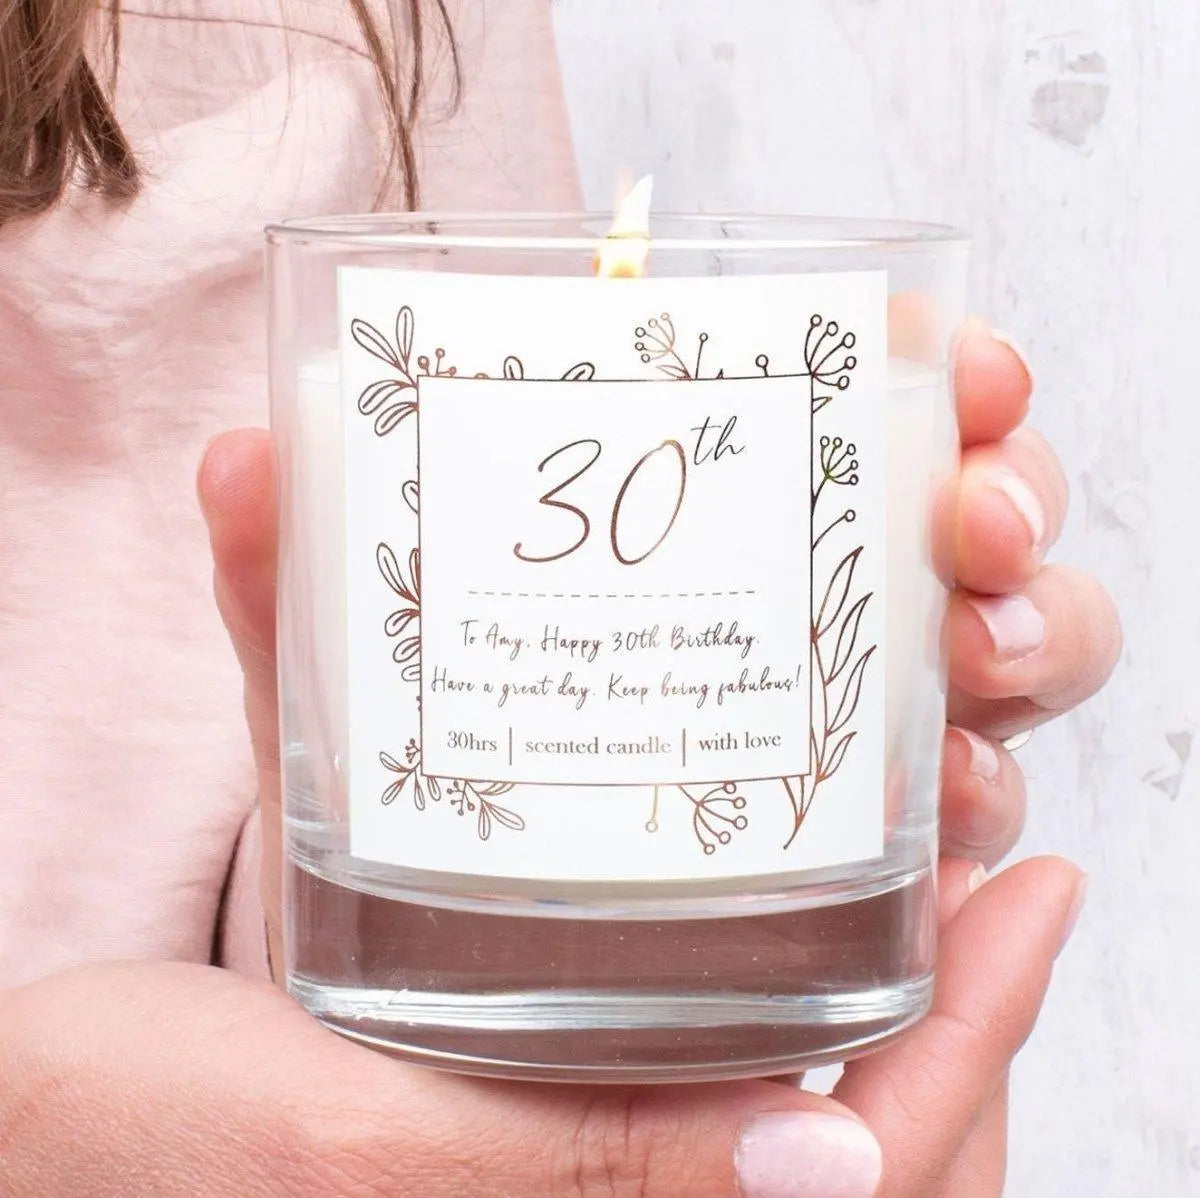 Personalised 30th Birthday Candle, Personalized Birthday Candle Gift, 30th Birthday Gift, Birthday Present, For Her, Birthday Any Age Gift - Amy Lucy